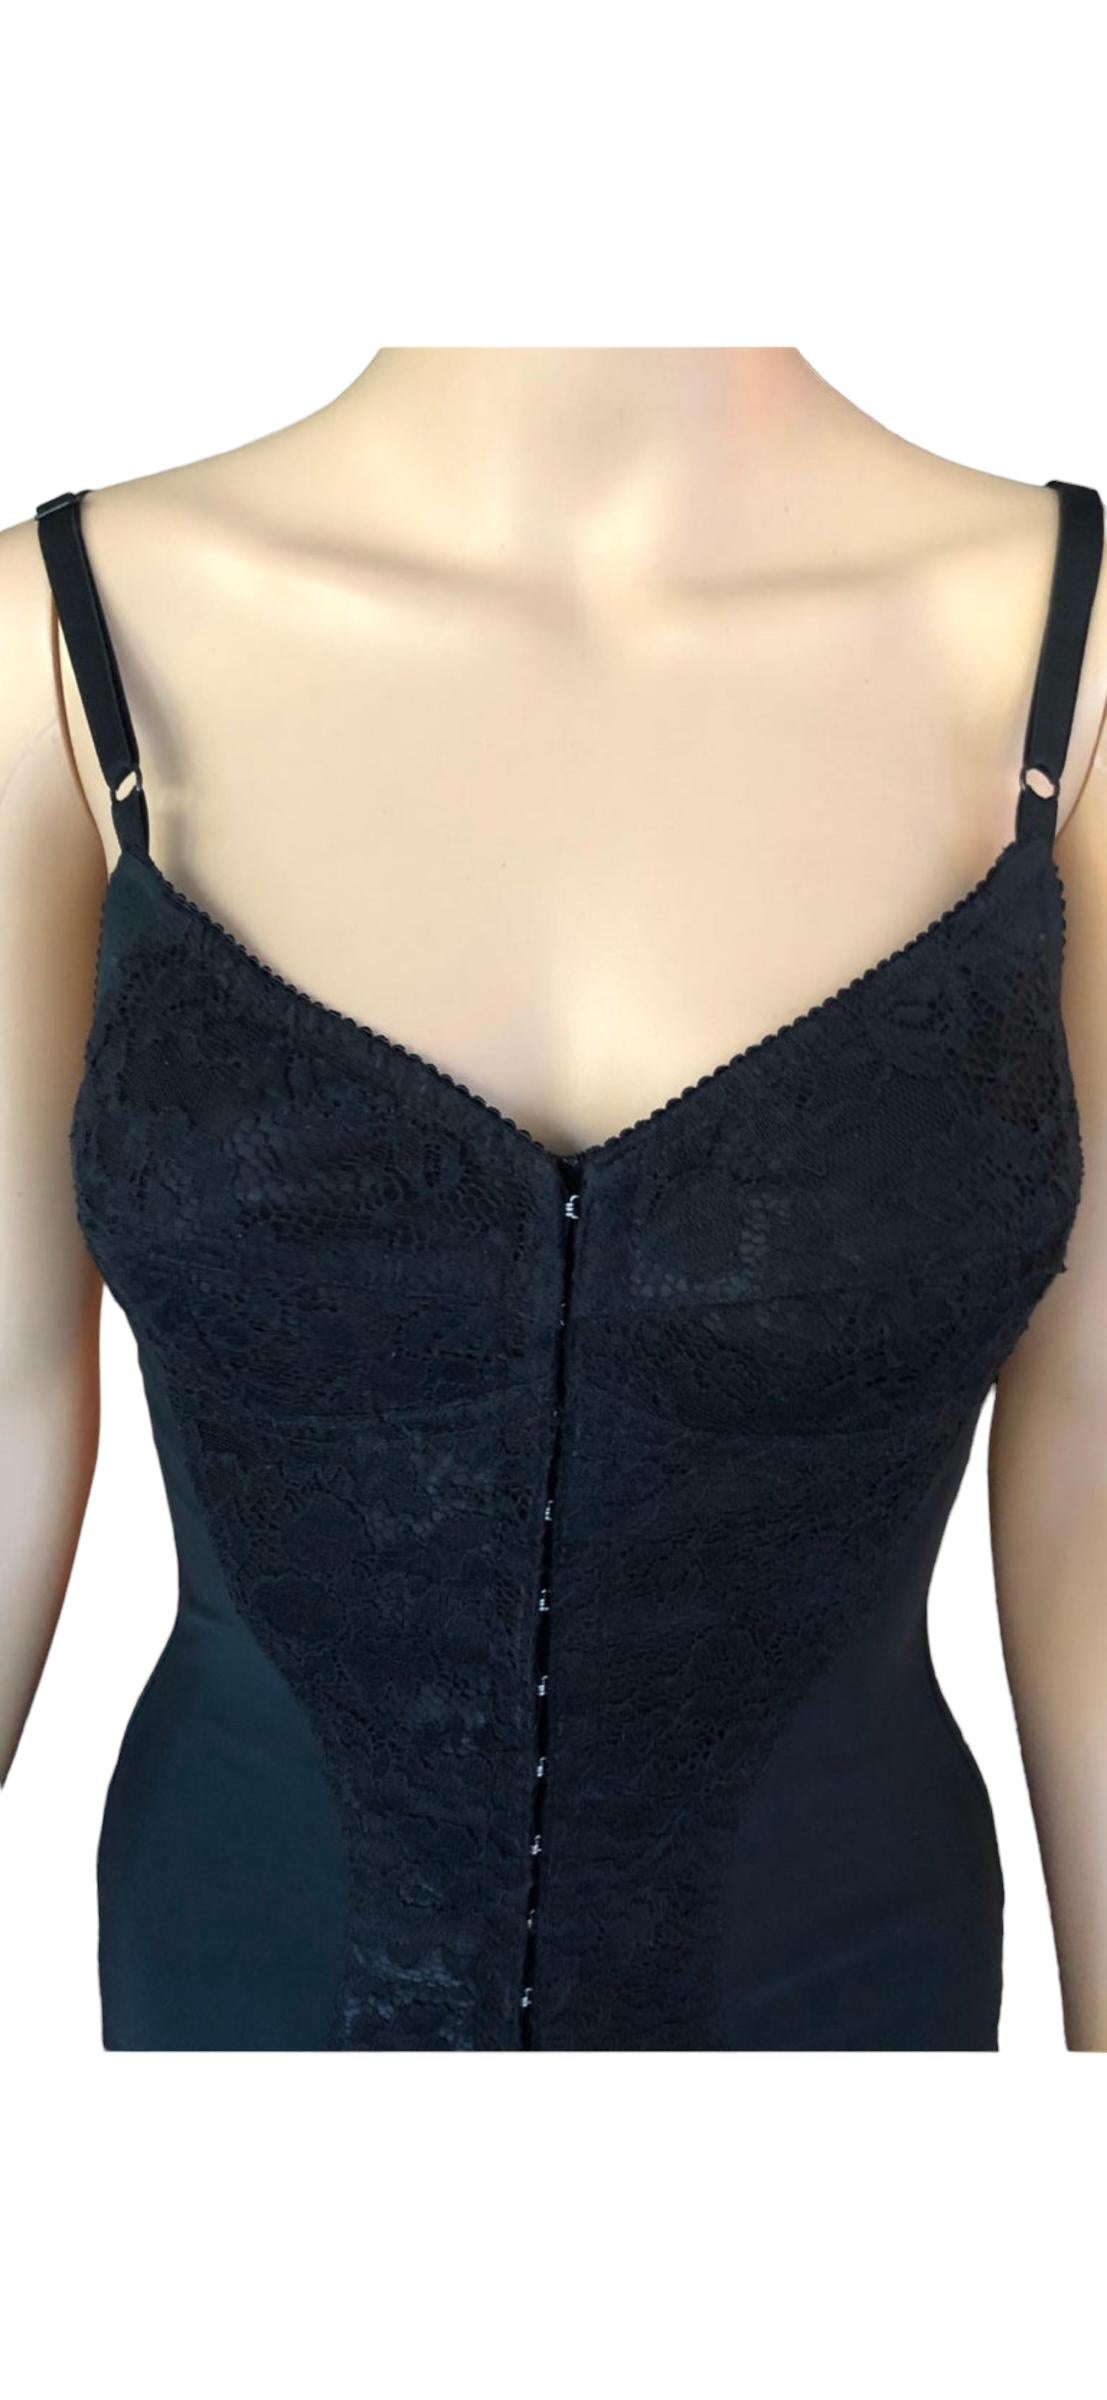 Dolce & Gabbana Vintage Special Edition Bodycon Corset Black Mini Dress In Excellent Condition For Sale In Naples, FL